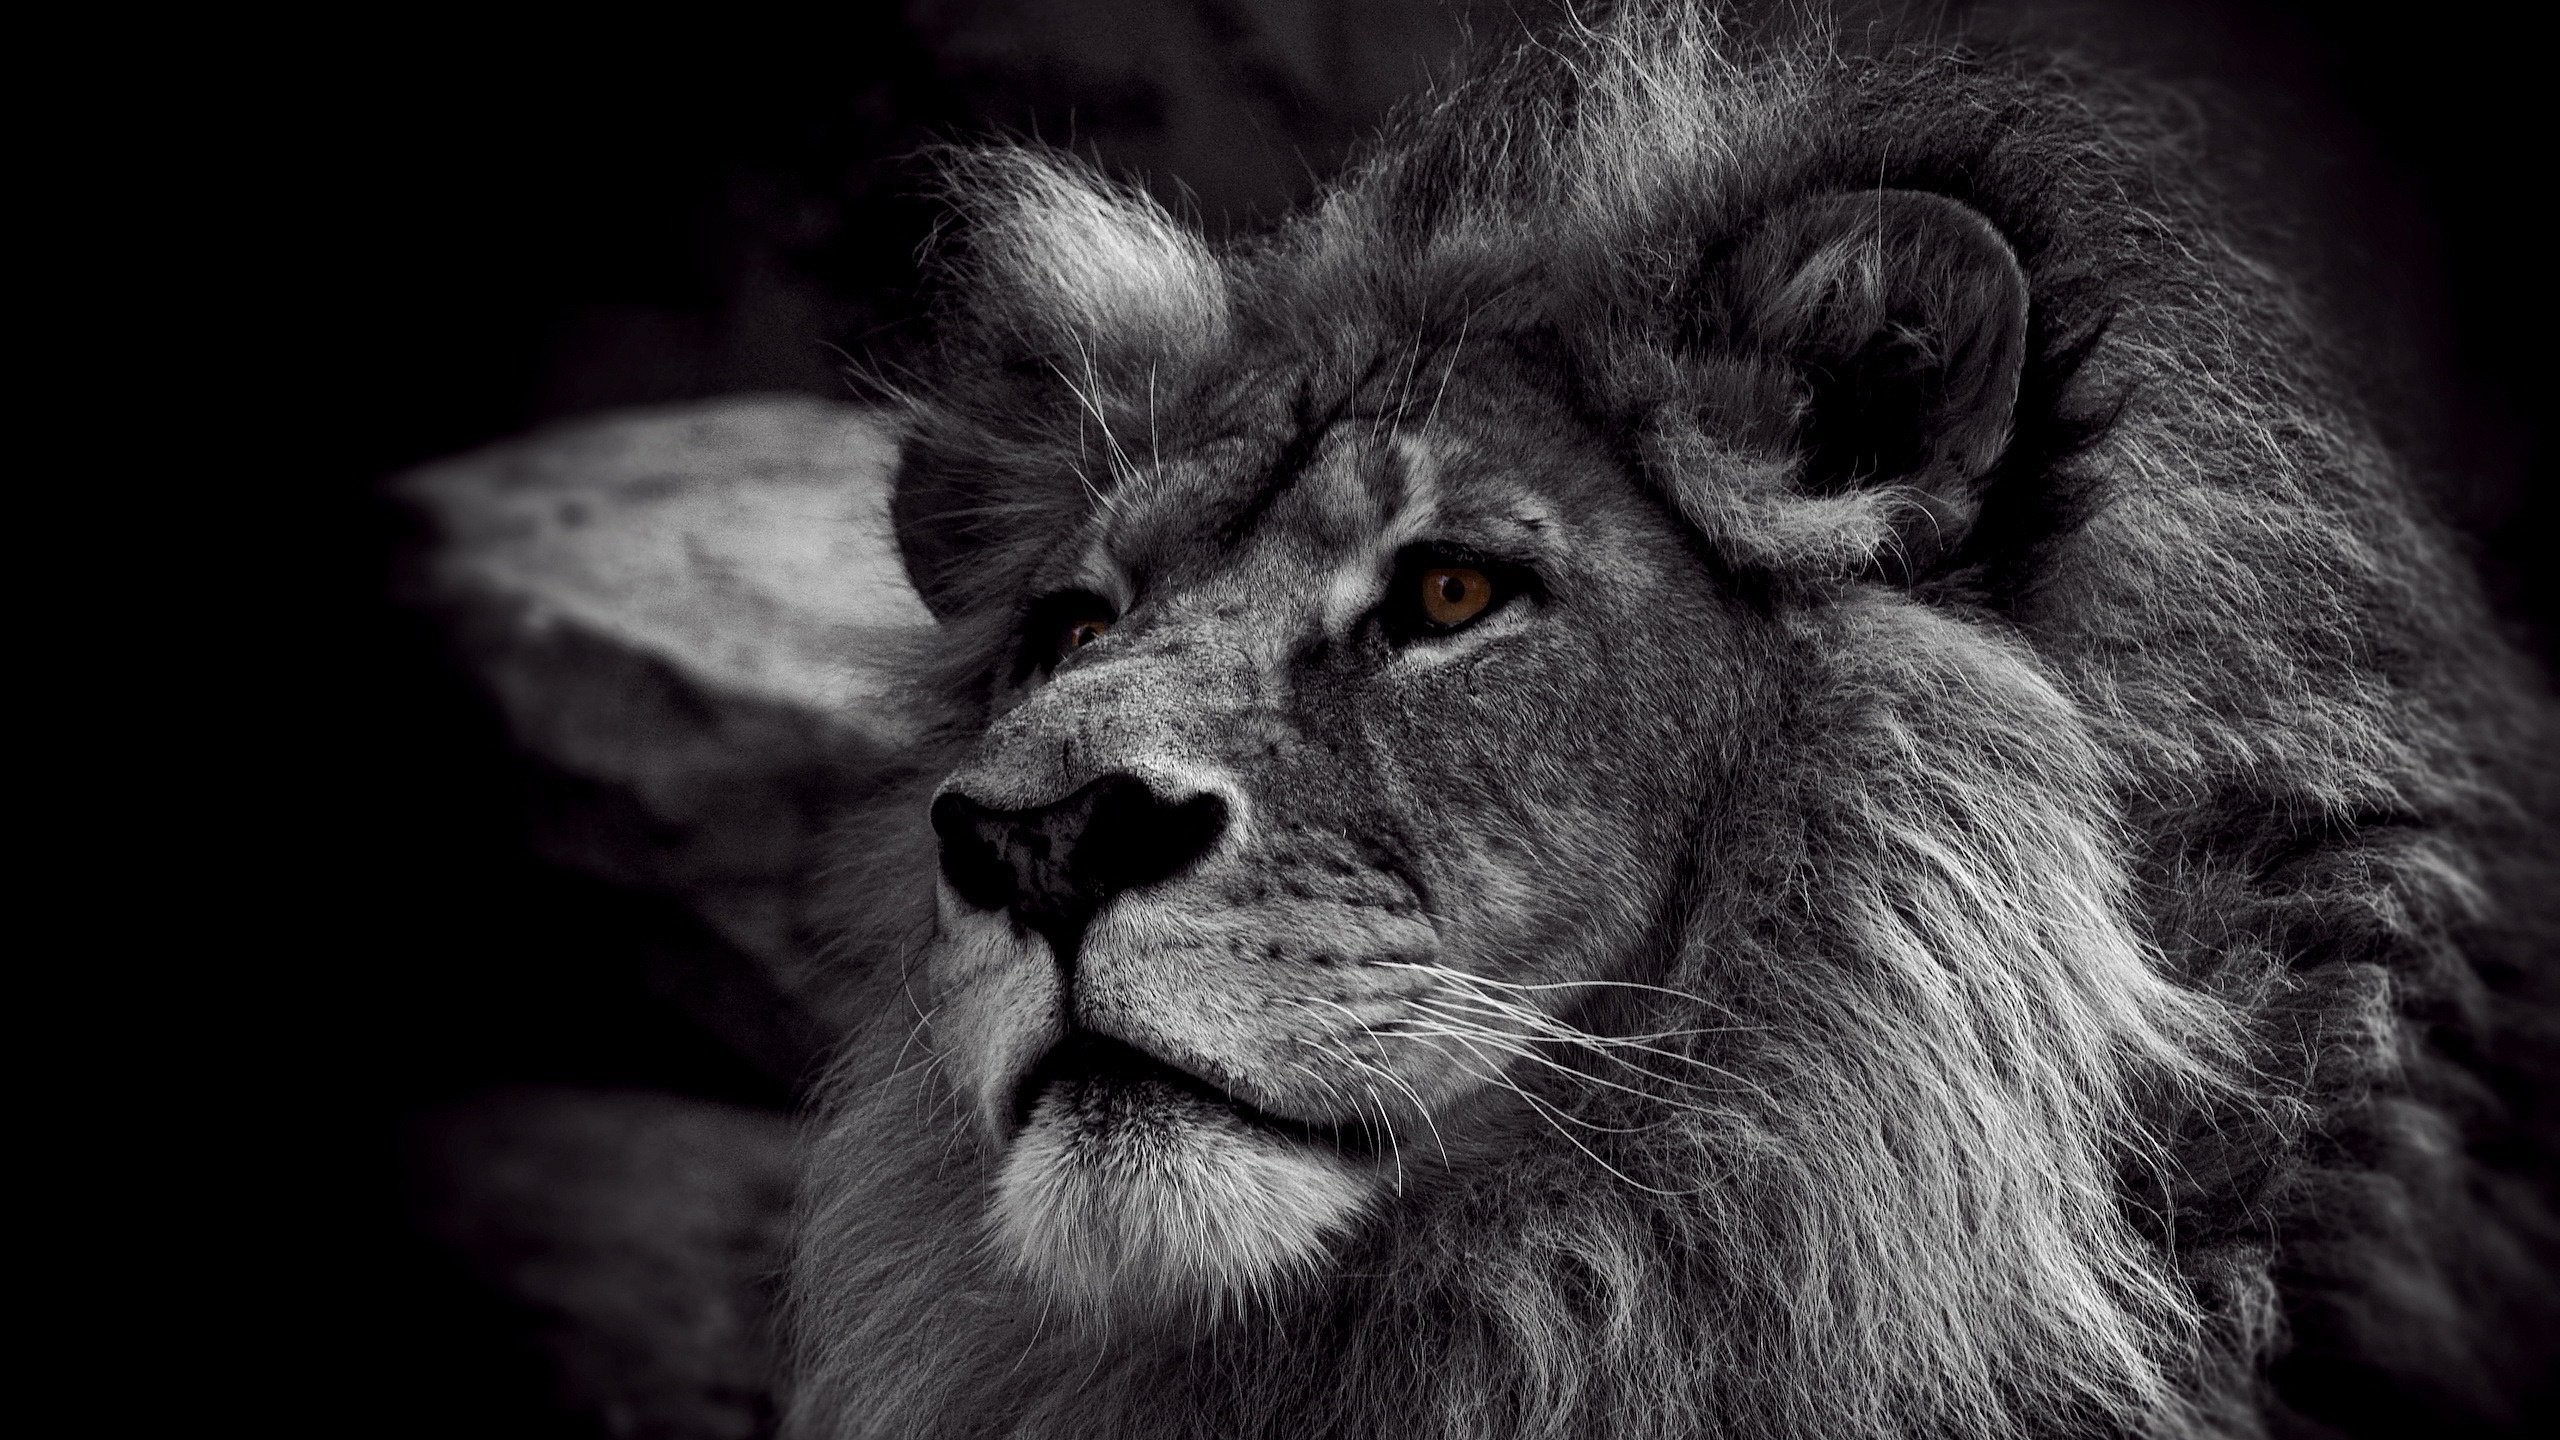 Lion Pictures - King Of The Jungle Wallpaper Download | MobCup